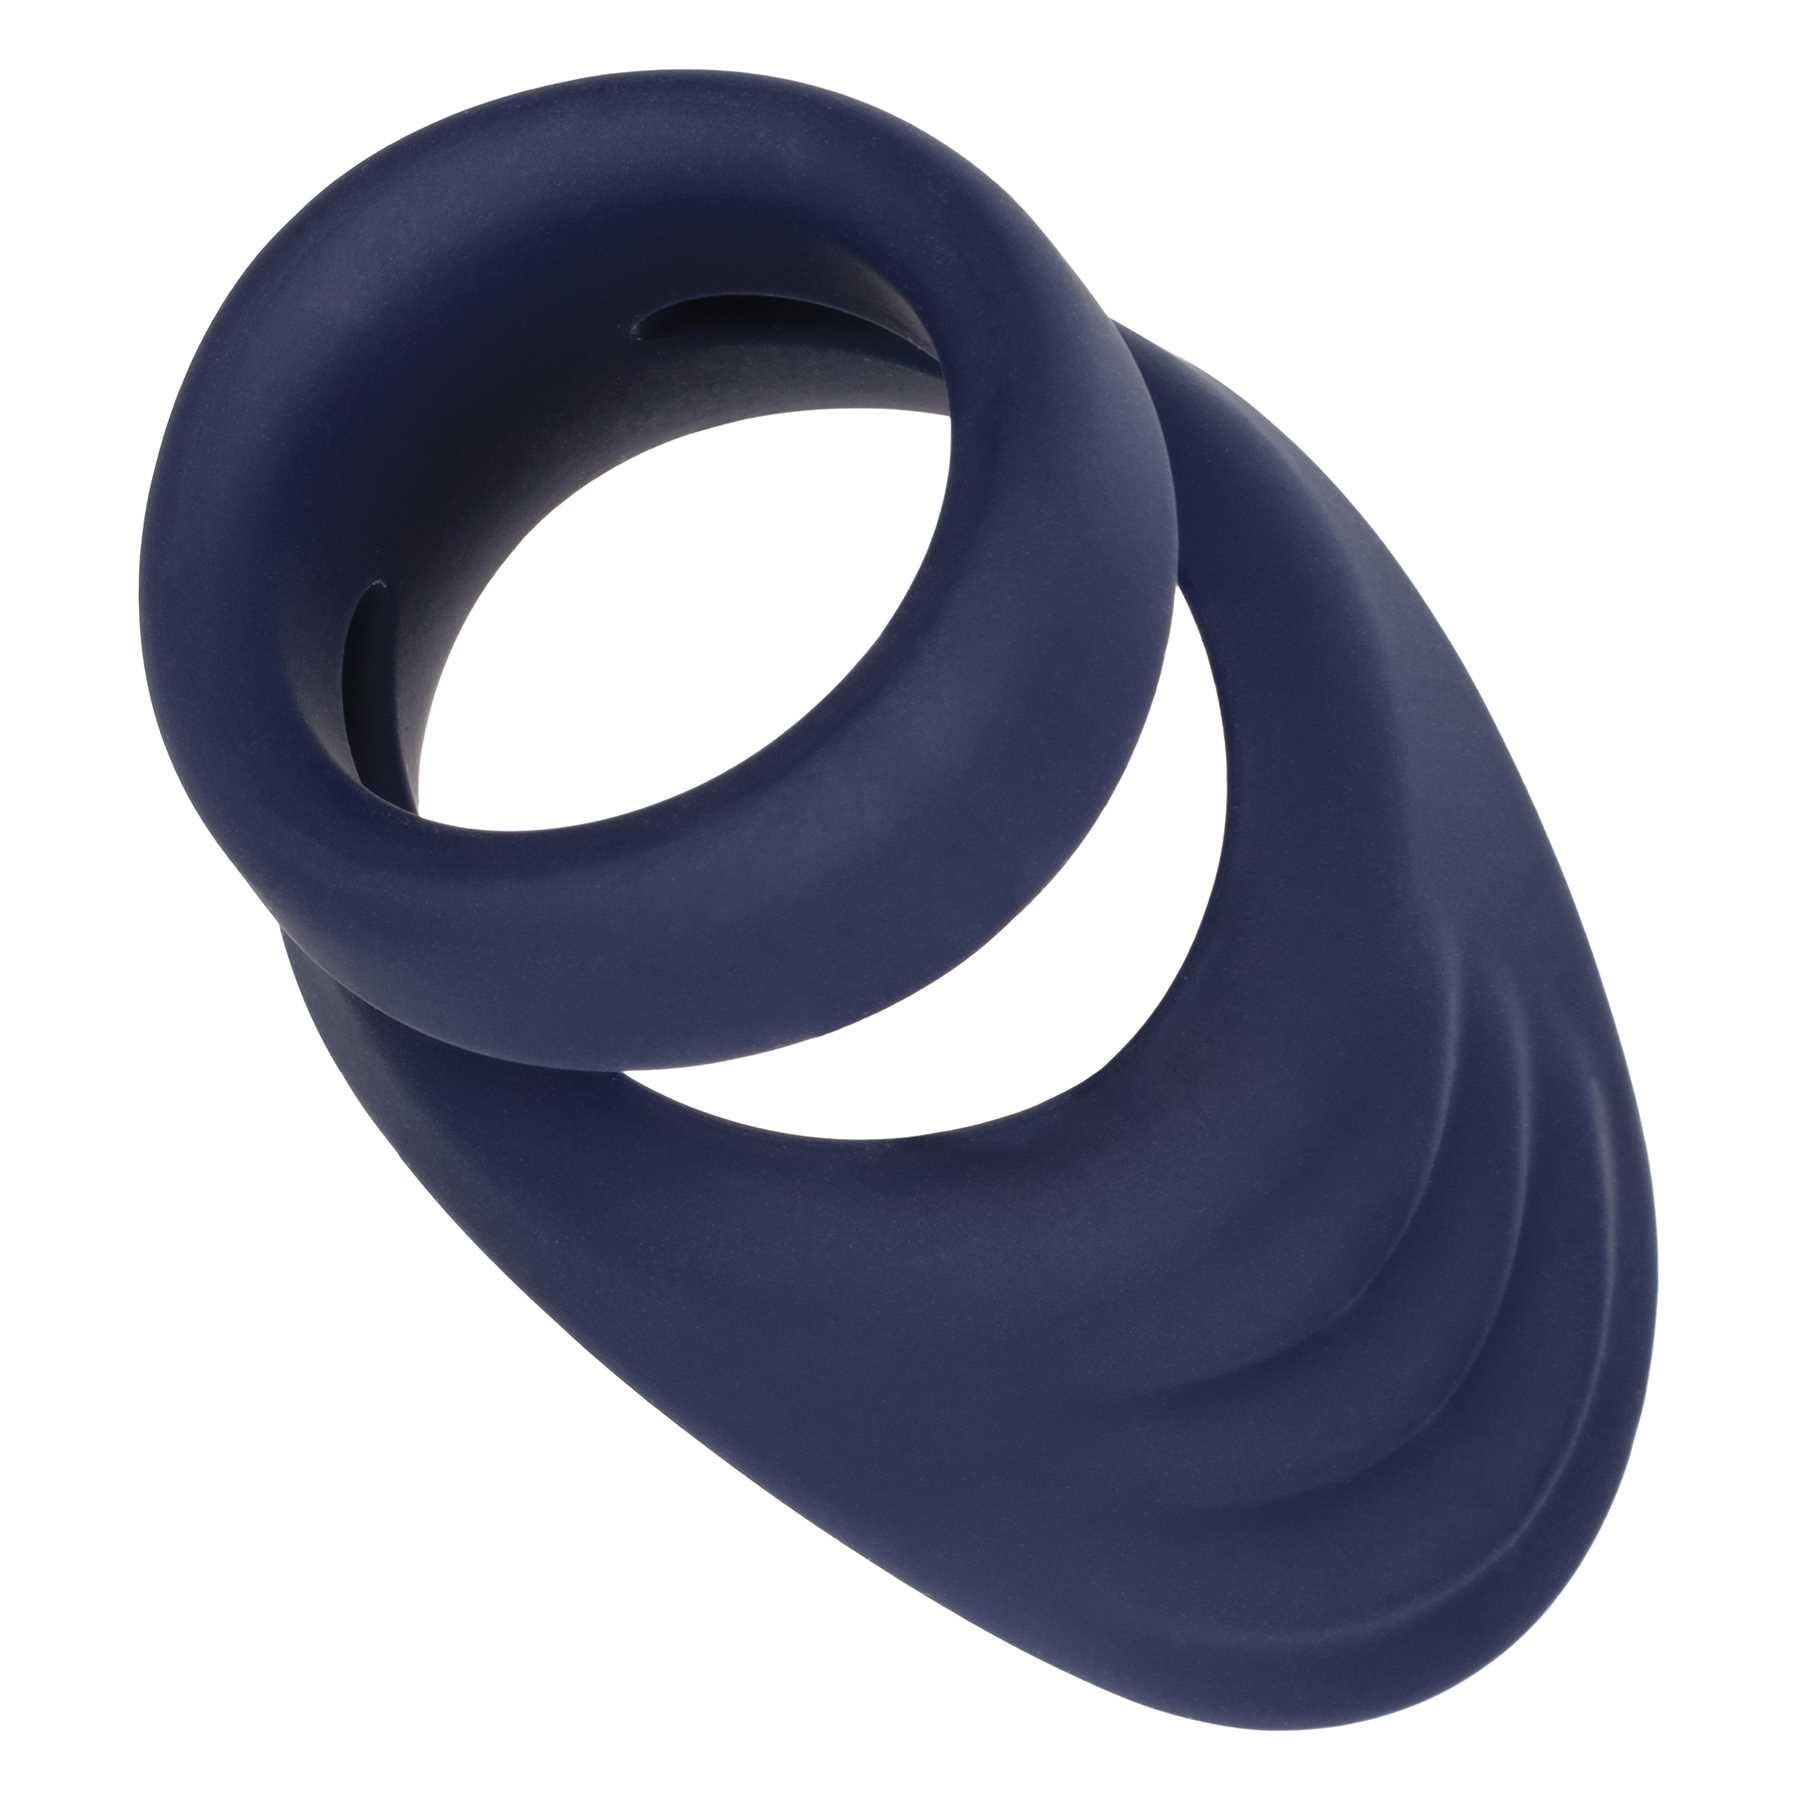 Viceroy Perineum Dual Ring product image 3